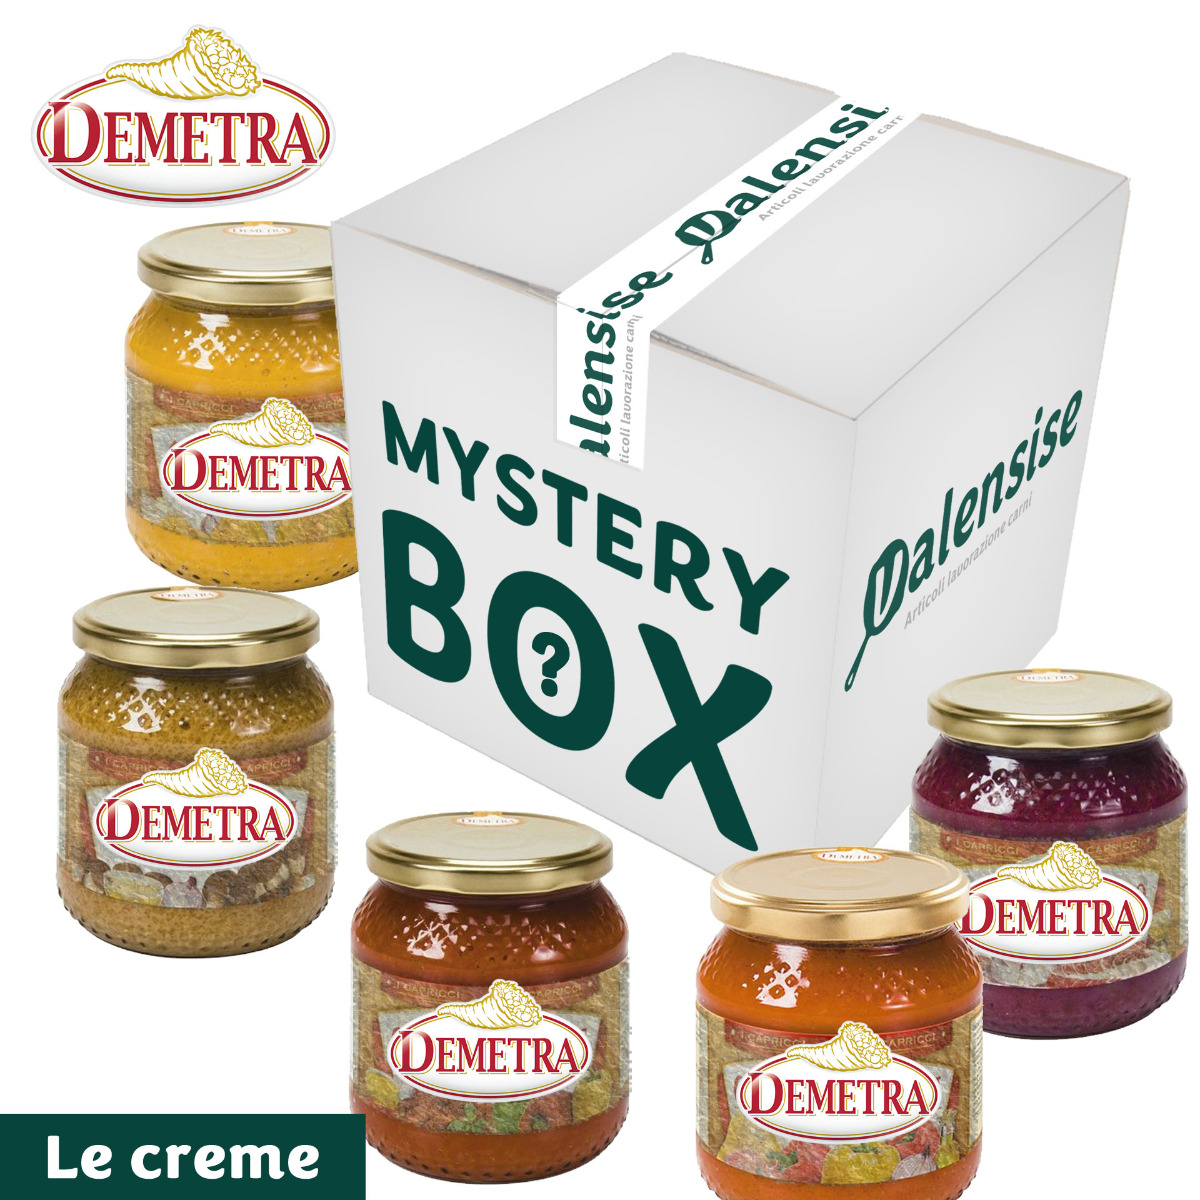 Mystery Box - Speciale Creme